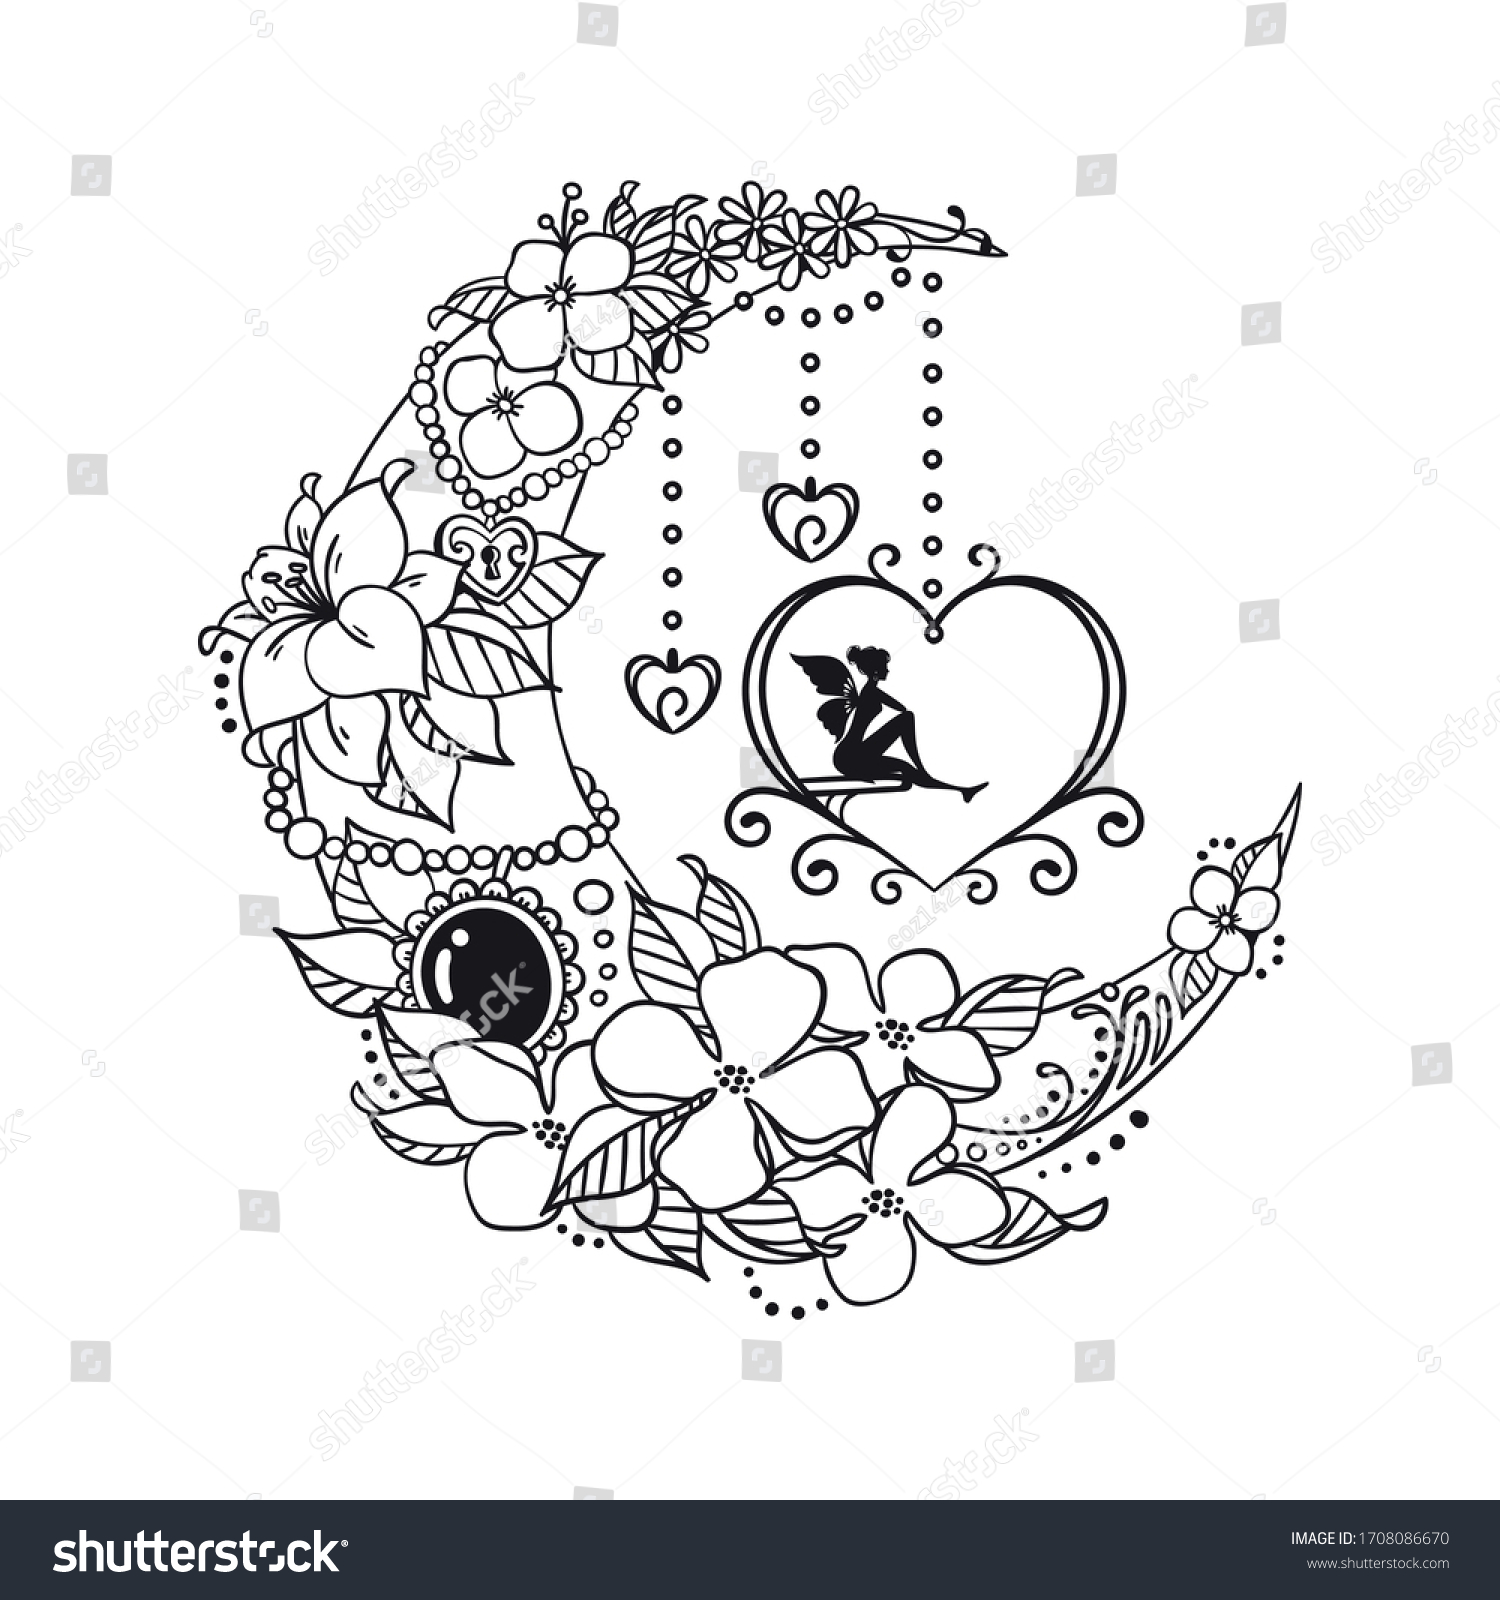 SVG of fairy and crescent moon illustration svg